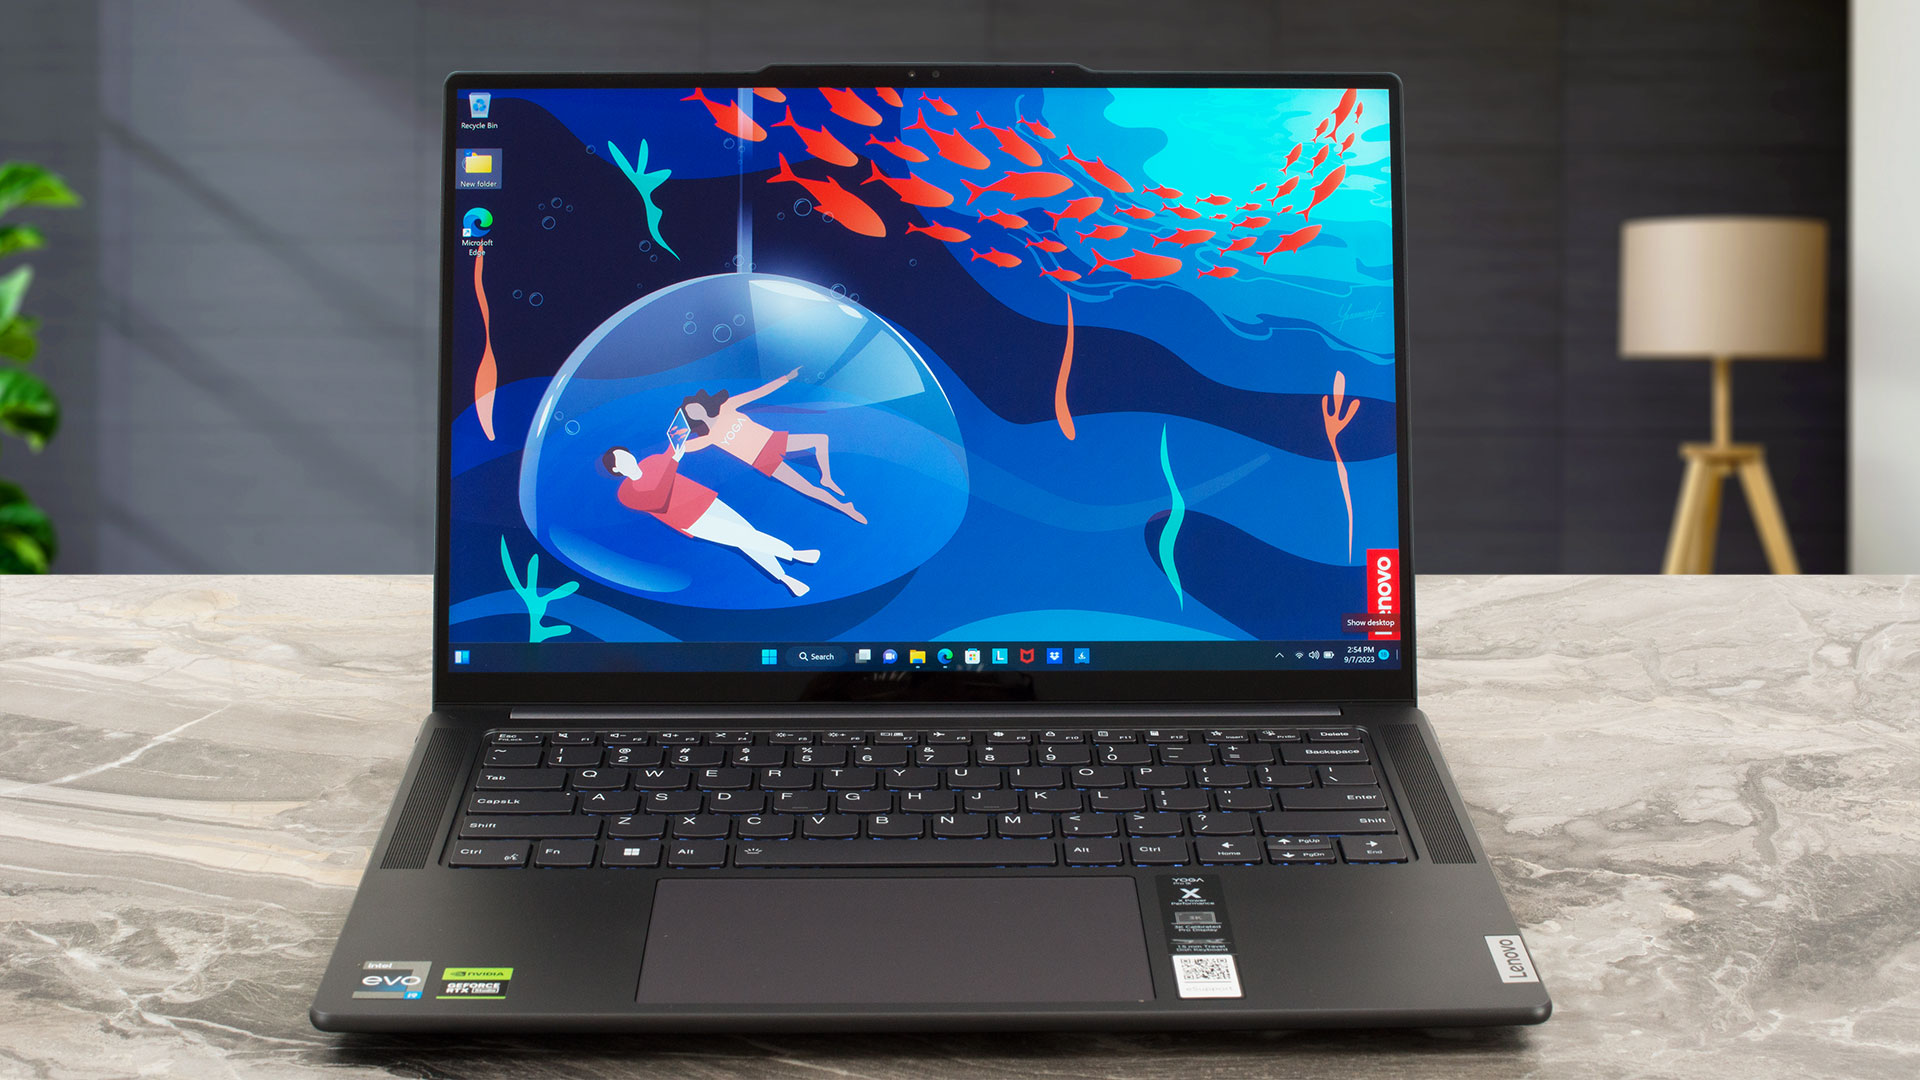 Lenovo Yoga Pro 7 14 G8 notebook review: GeForce RTX 4050 laptop powers 3K  display with 120 Hz -  Reviews